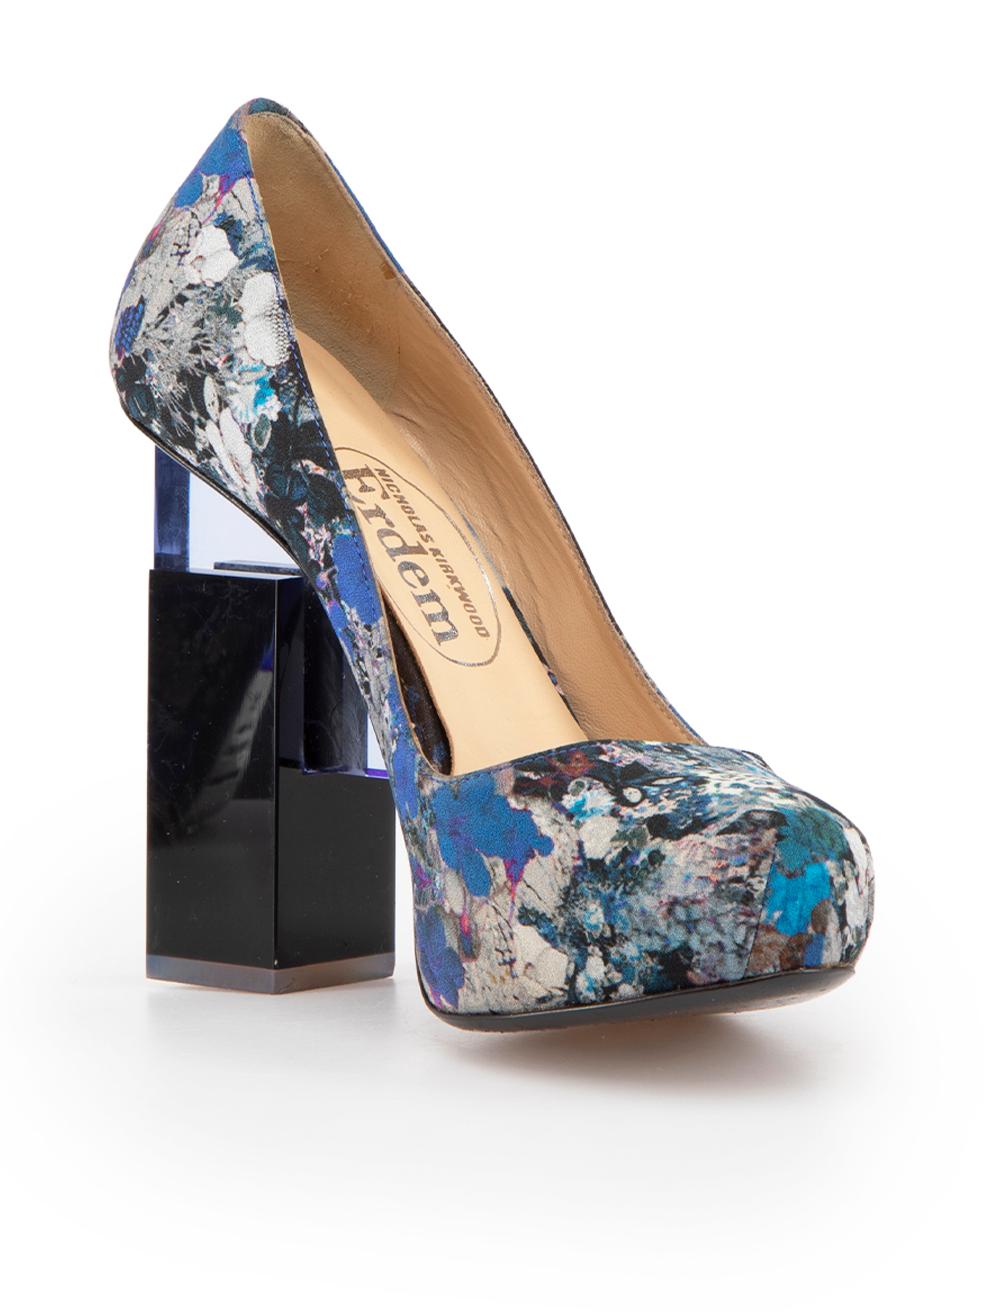 CONDITION is Very good. Minimal wear to shoes is evident. Minimal wear to both heels with light scratches to the acrylic on this used Nicolas Kikwood x Erdem designer resale item.
 
 Details
 Blue
 Cloth textile
 Slip on pumps
 Floral print pattern
